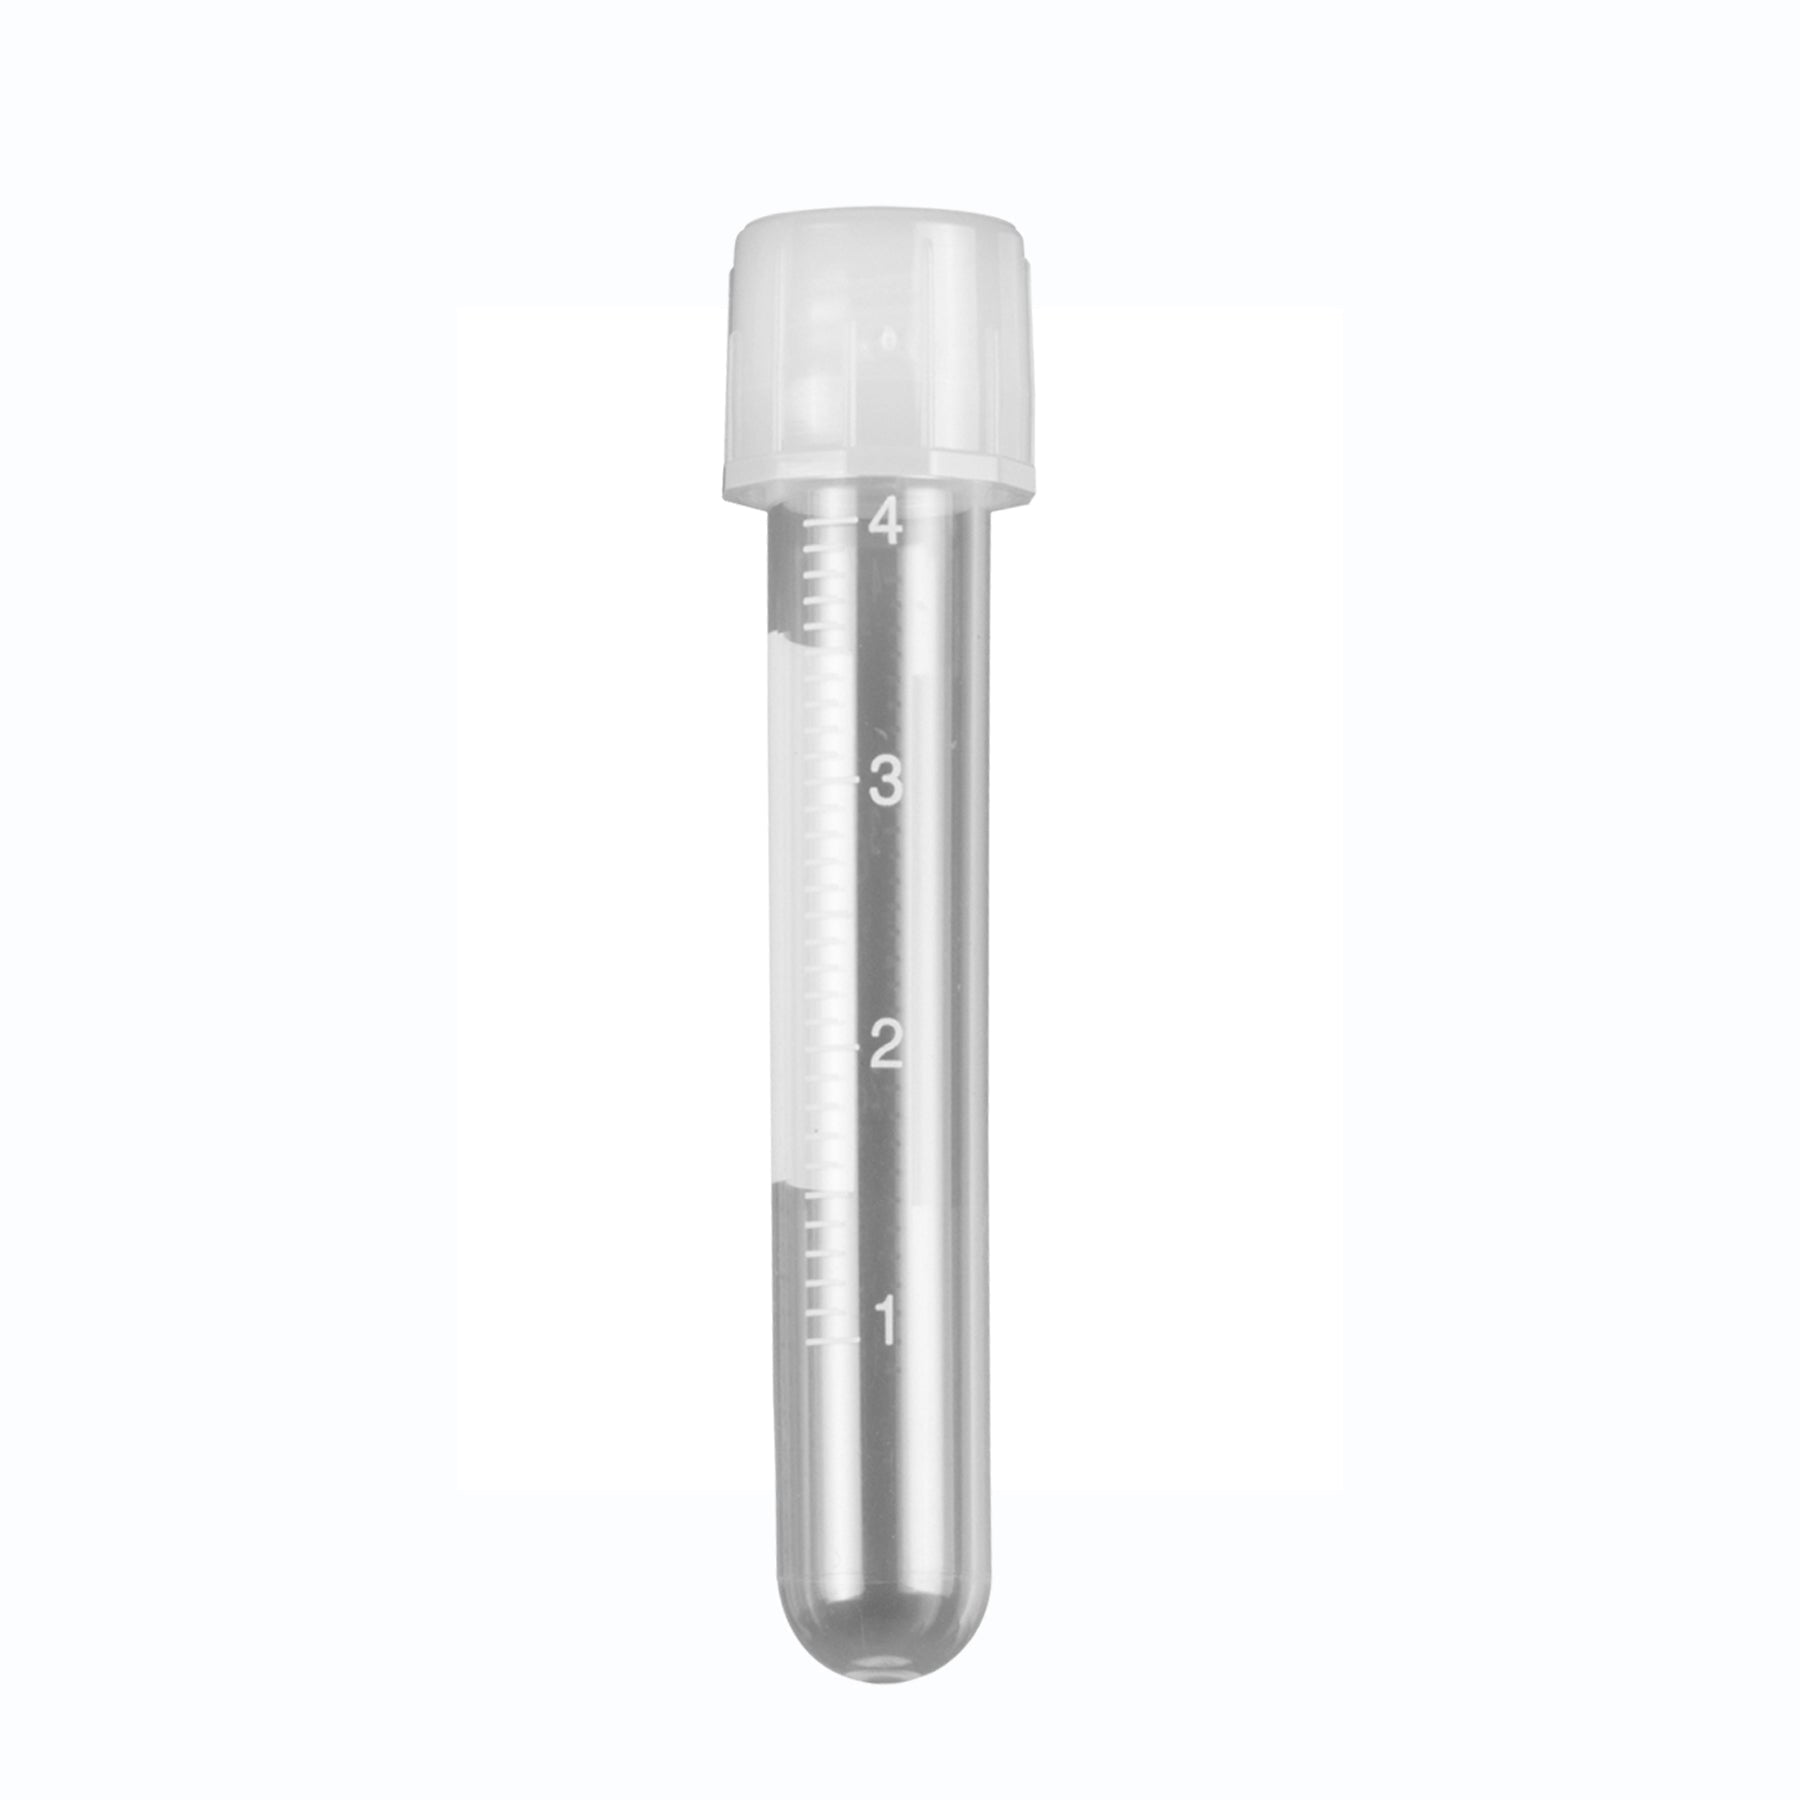 MTC Bio T8734 Culture Tube, 5mL, 12 x 75mm, PP, w/ attached 2-position screw-cap, printed graduations, sterile, individually wrapped